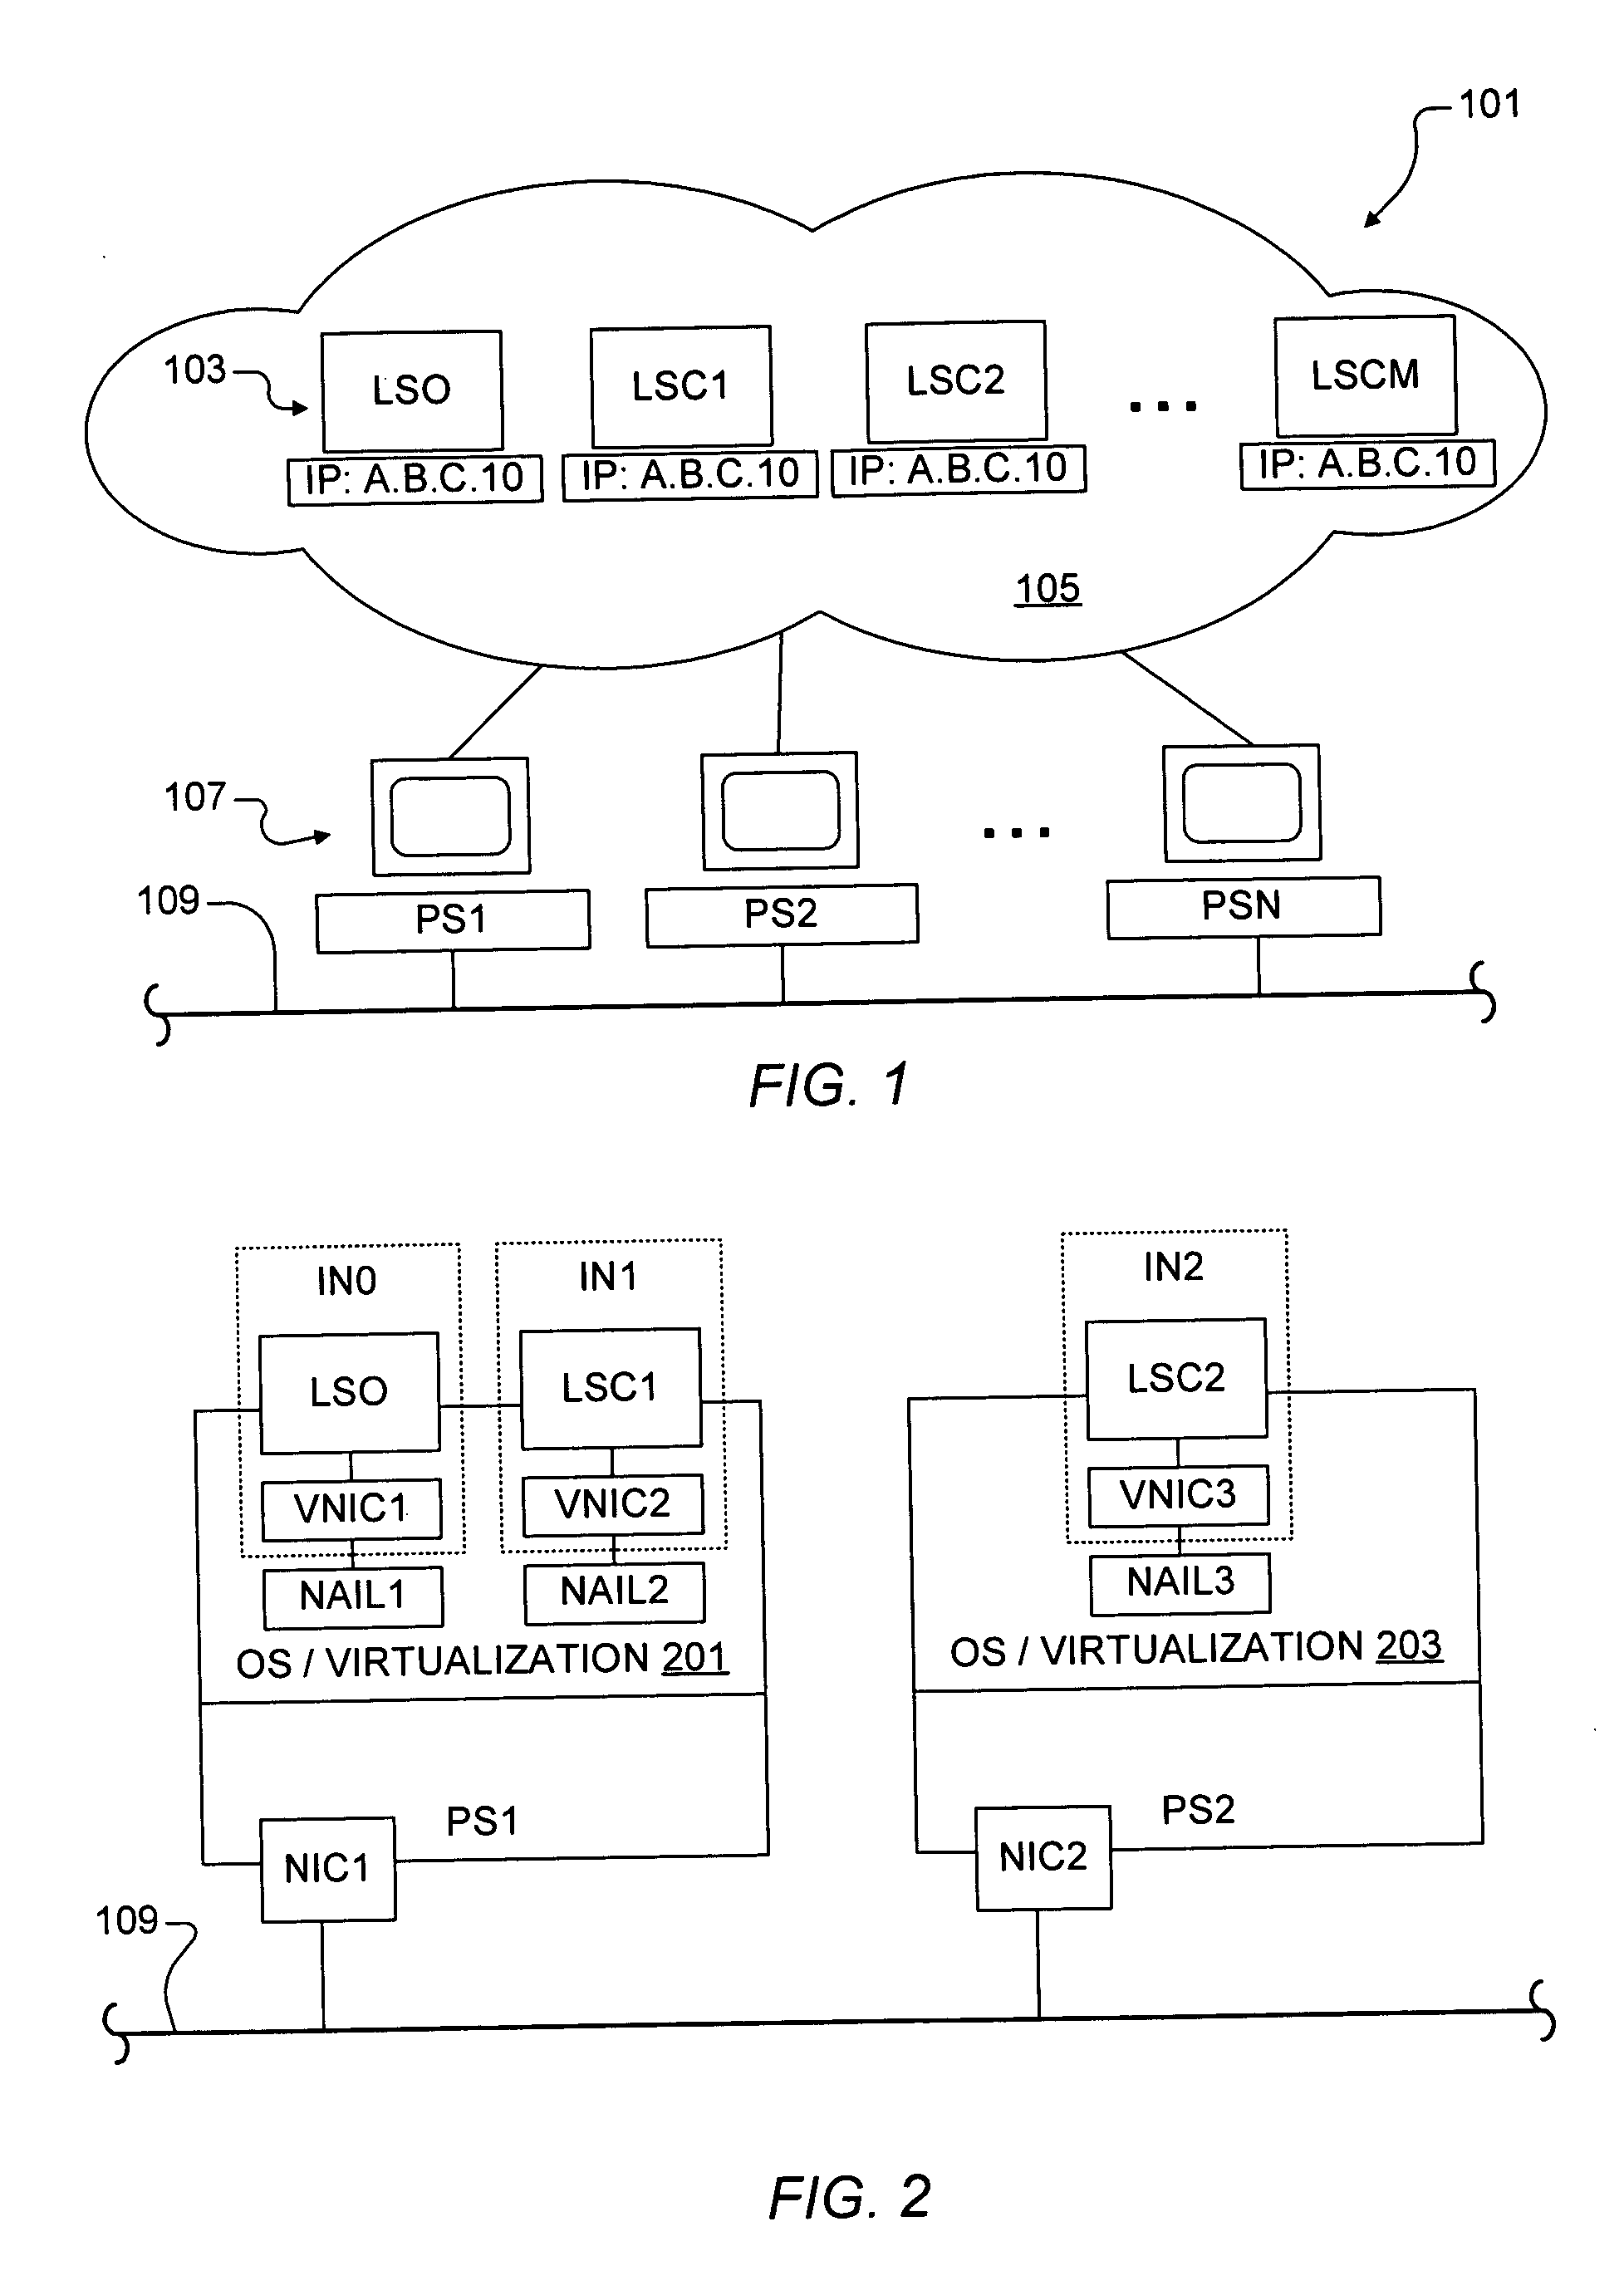 Network abstraction and isolation layer for masquerading machine identity of a computer